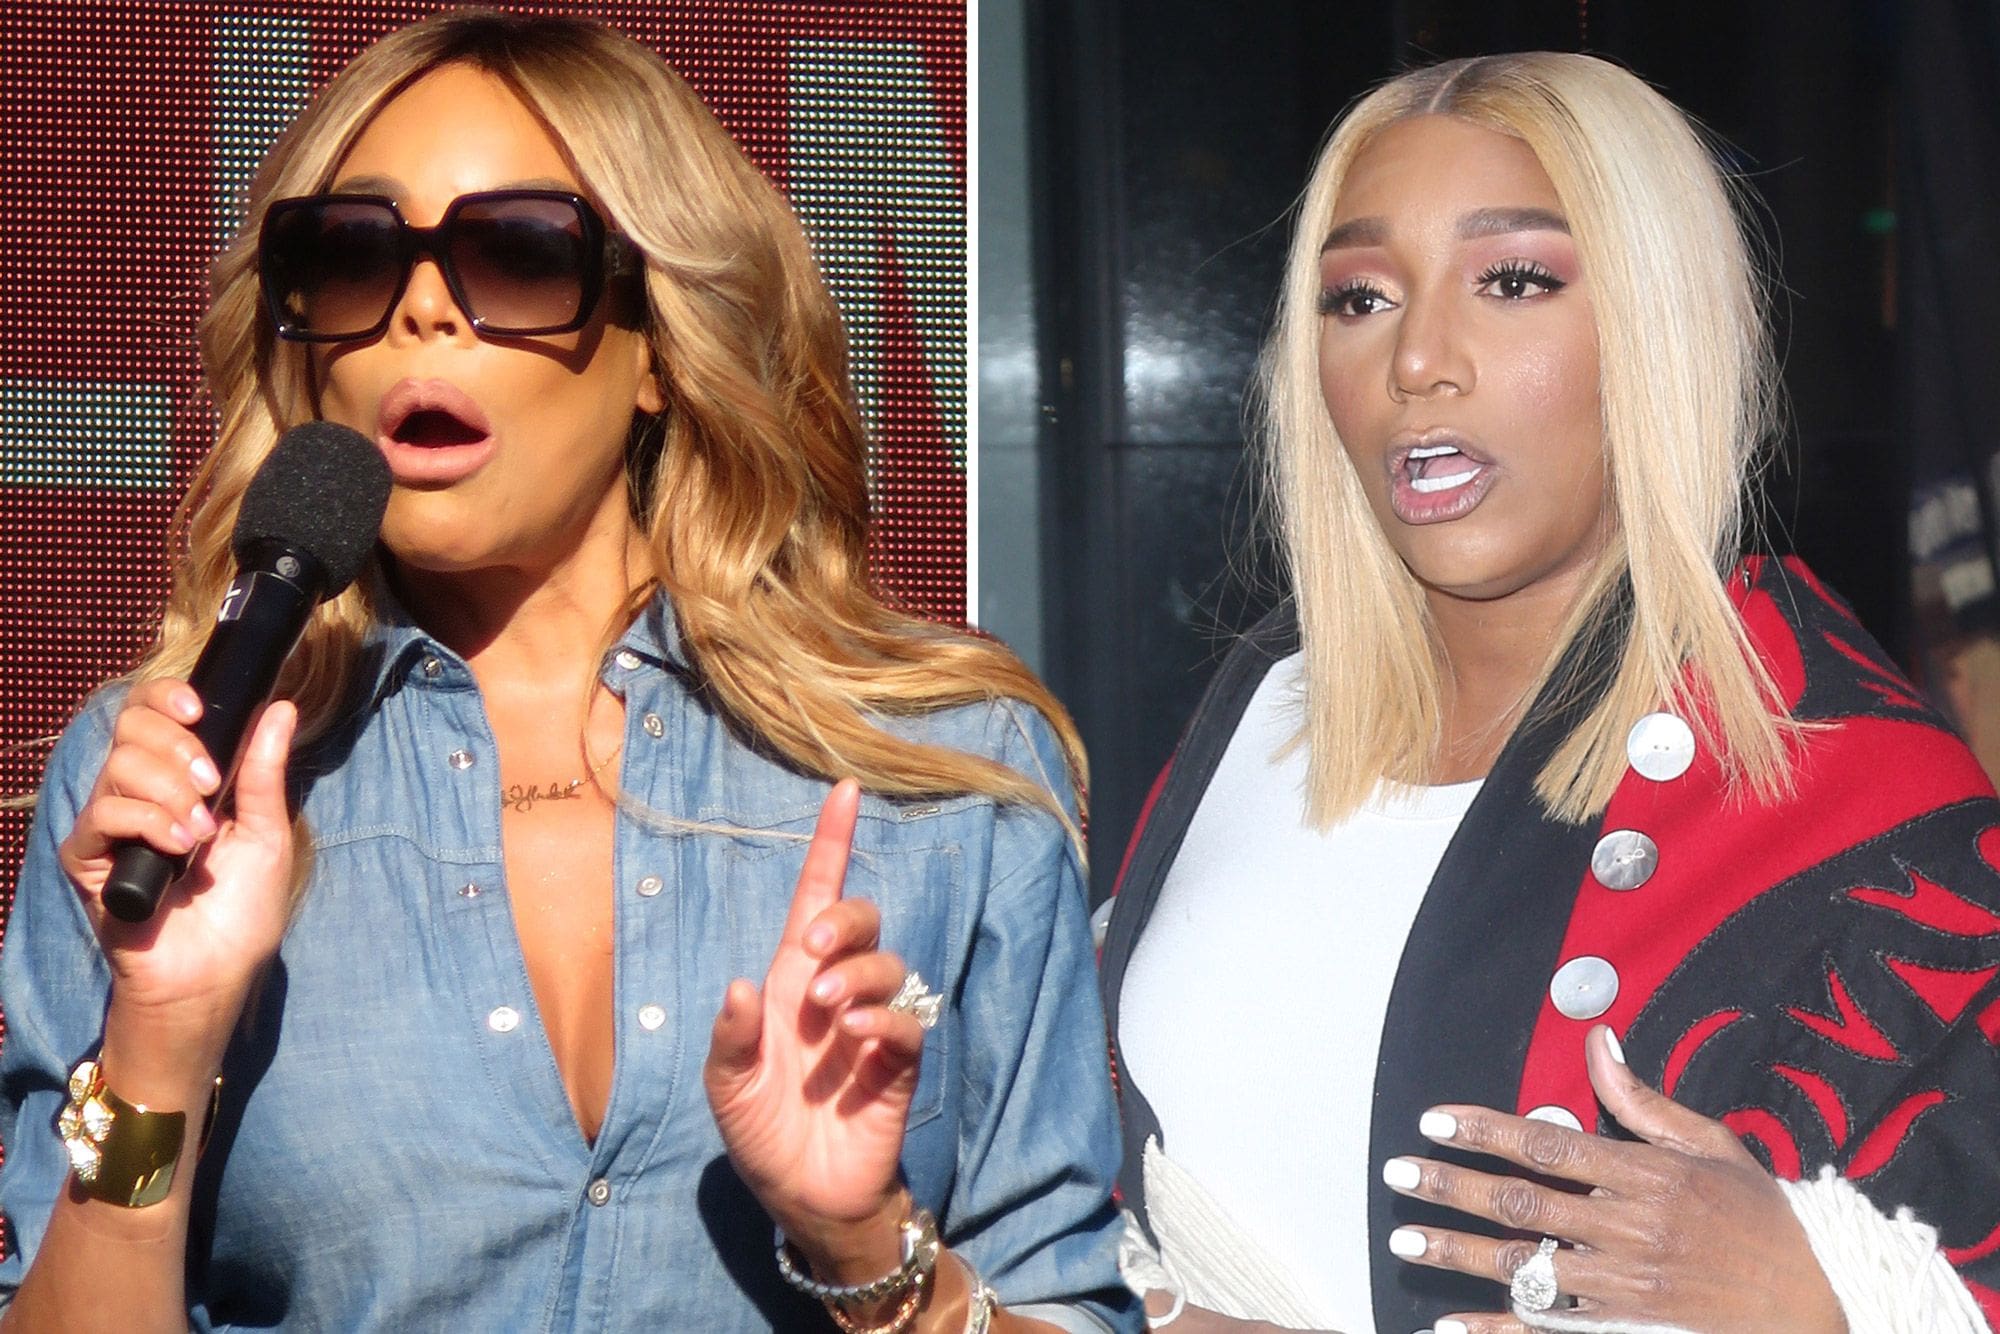 NeNe Leakes' Fans Say She Doesn't Need Any Condescending Friends Following The Wendy Williams Episode